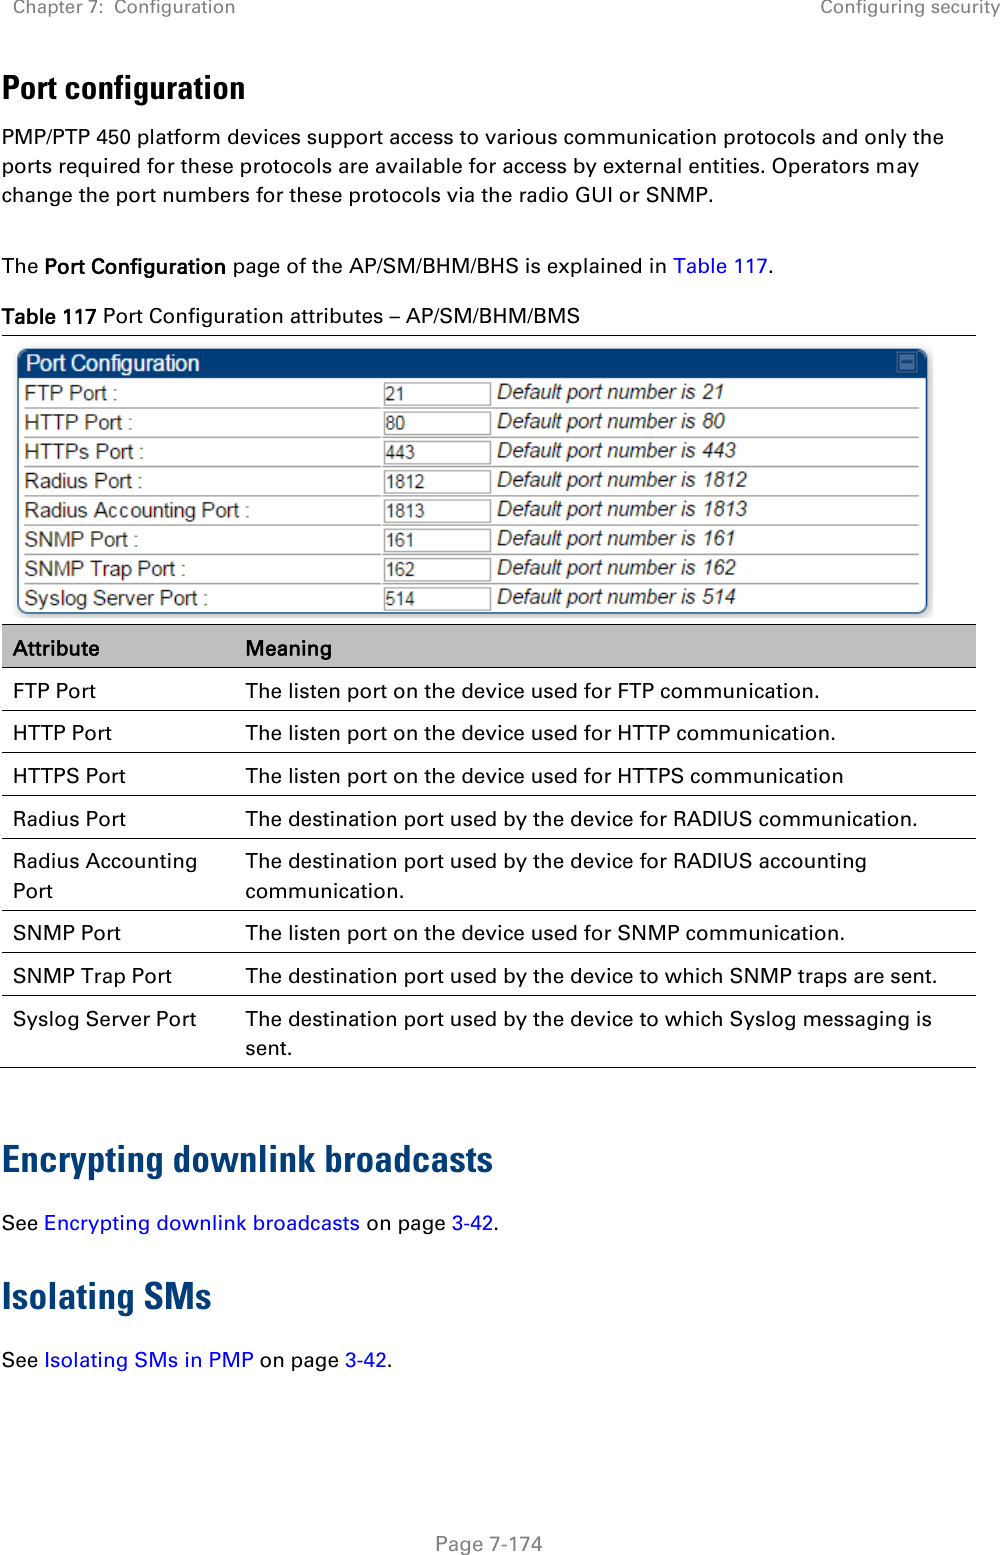 Chapter 7:  Configuration Configuring security   Page 7-174 Port configuration  PMP/PTP 450 platform devices support access to various communication protocols and only the ports required for these protocols are available for access by external entities. Operators may change the port numbers for these protocols via the radio GUI or SNMP.  The Port Configuration page of the AP/SM/BHM/BHS is explained in Table 117. Table 117 Port Configuration attributes – AP/SM/BHM/BMS  Attribute Meaning FTP Port The listen port on the device used for FTP communication. HTTP Port The listen port on the device used for HTTP communication. HTTPS Port The listen port on the device used for HTTPS communication Radius Port The destination port used by the device for RADIUS communication. Radius Accounting Port The destination port used by the device for RADIUS accounting communication. SNMP Port The listen port on the device used for SNMP communication. SNMP Trap Port The destination port used by the device to which SNMP traps are sent. Syslog Server Port The destination port used by the device to which Syslog messaging is sent.  Encrypting downlink broadcasts See Encrypting downlink broadcasts on page 3-42. Isolating SMs See Isolating SMs in PMP on page 3-42.   